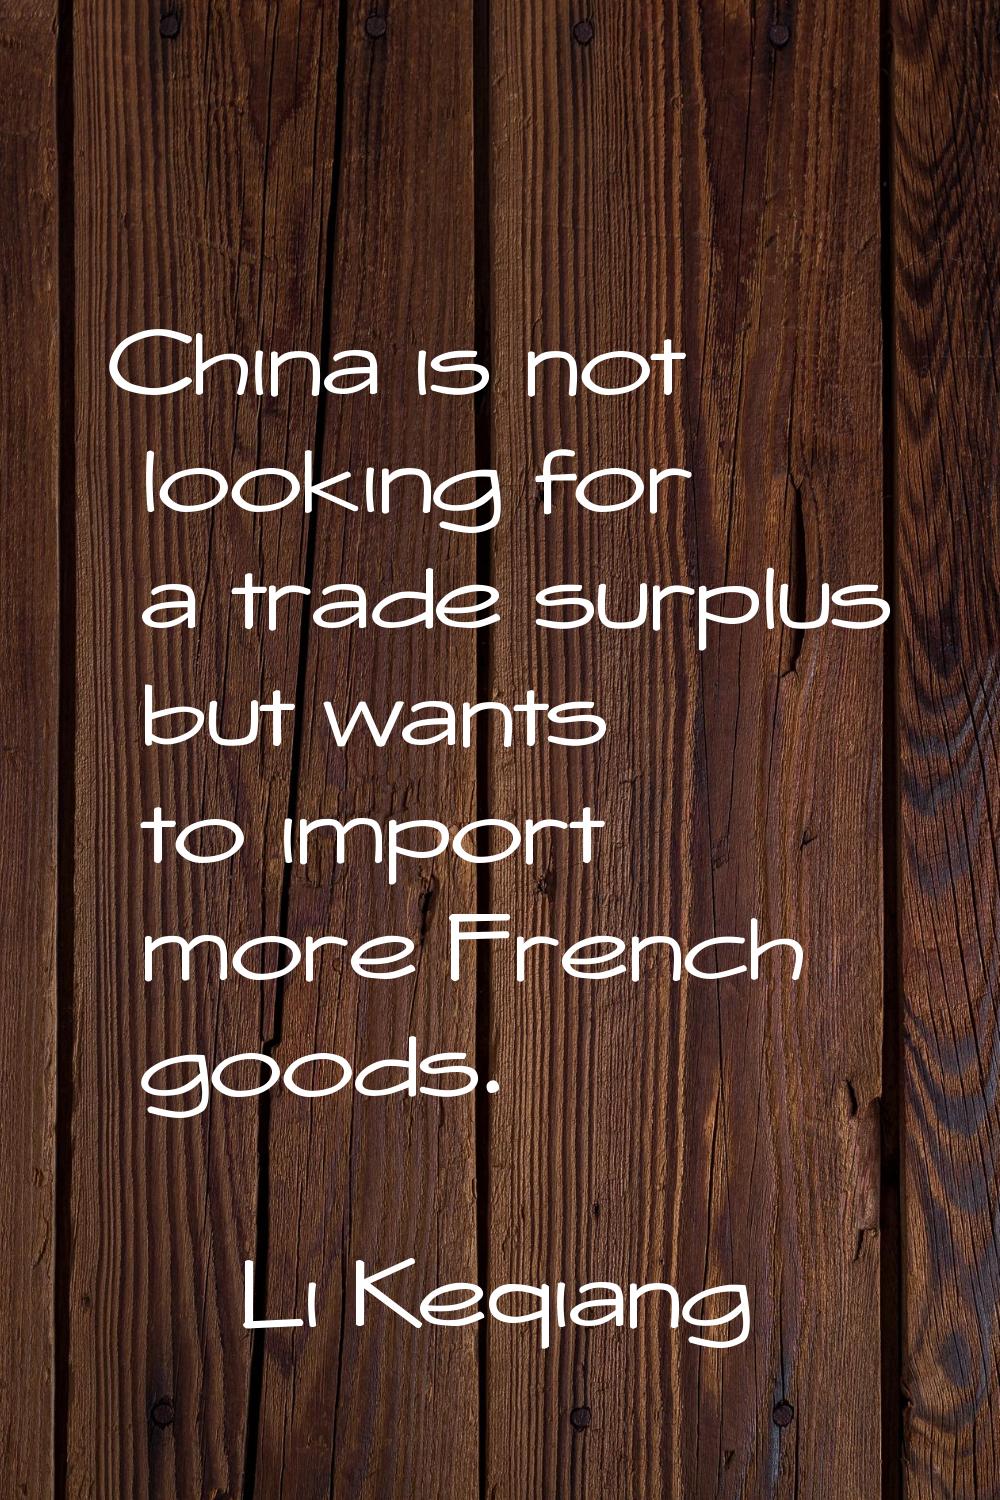 China is not looking for a trade surplus but wants to import more French goods.